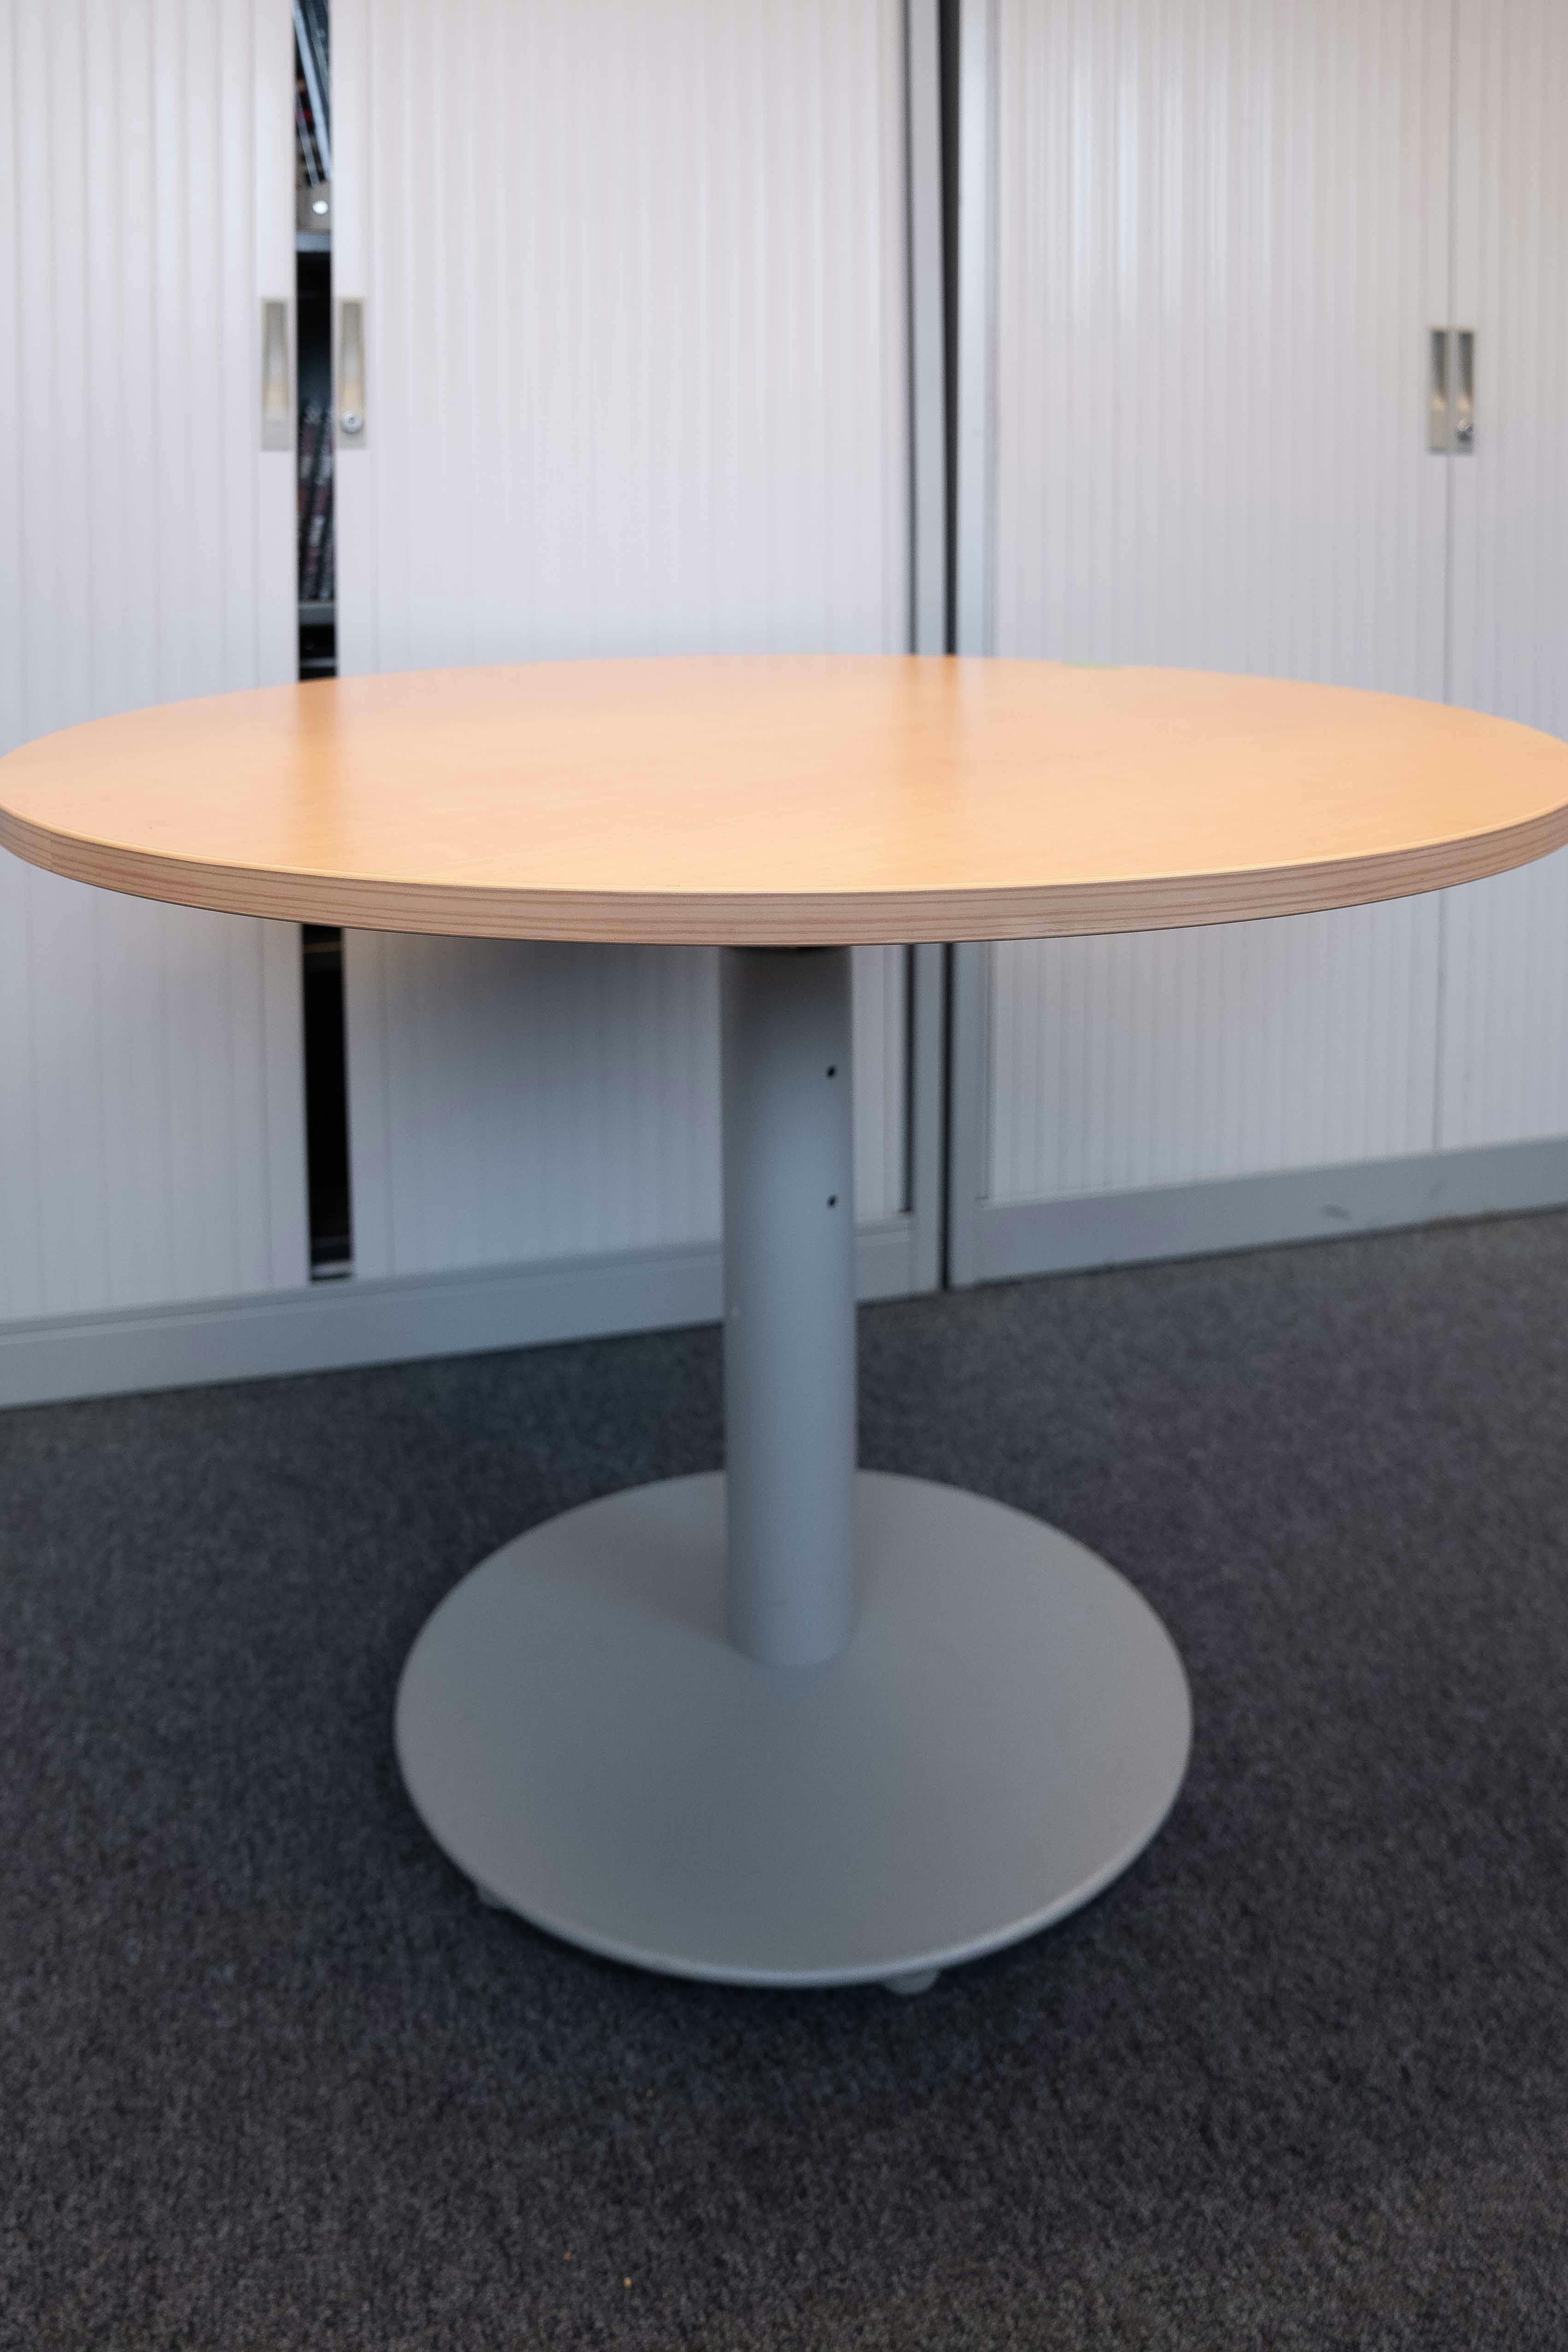 Round wood table with Grey leg - Second hand quality "Tables" - Relieve Furniture